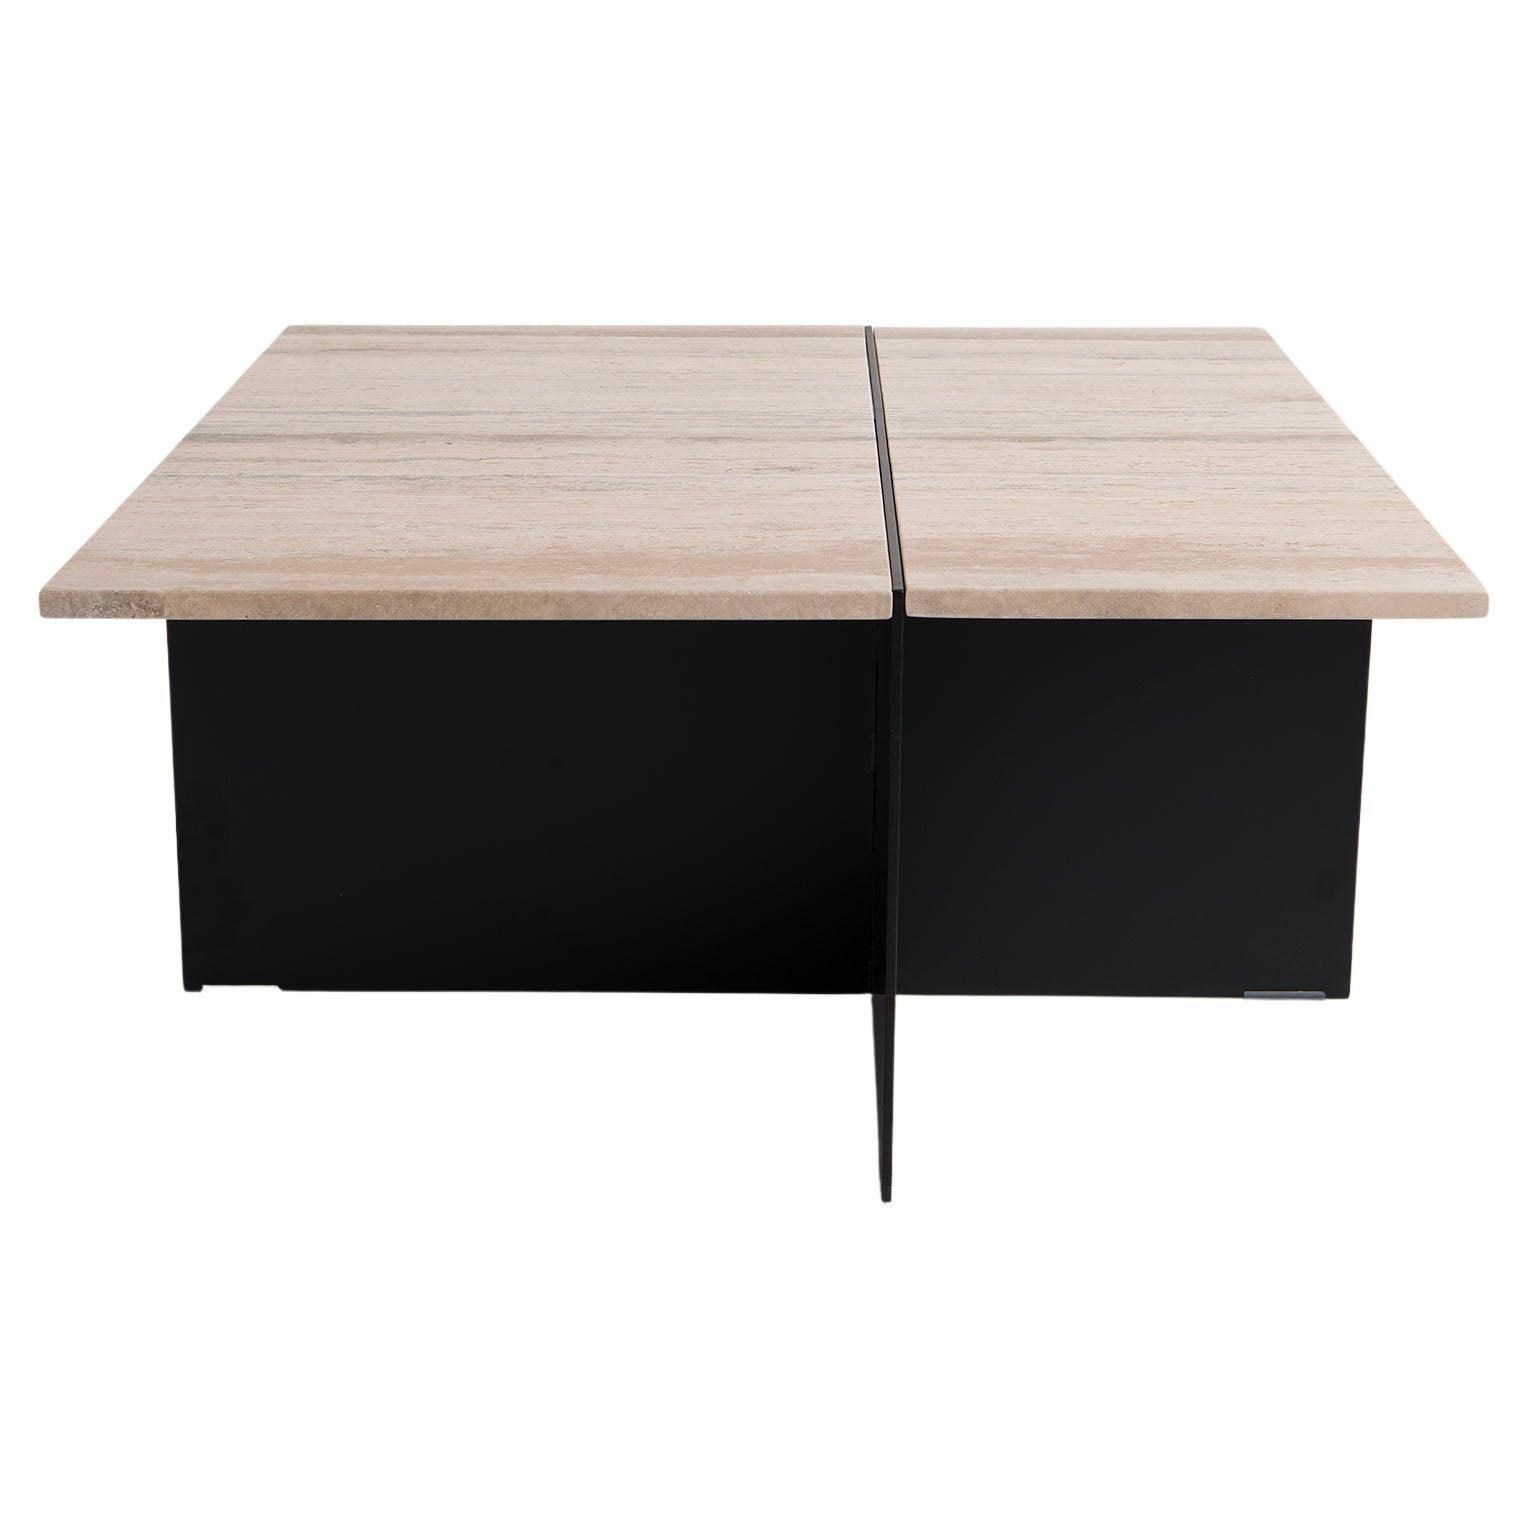 Division Coffee Table, Square by Phase Design